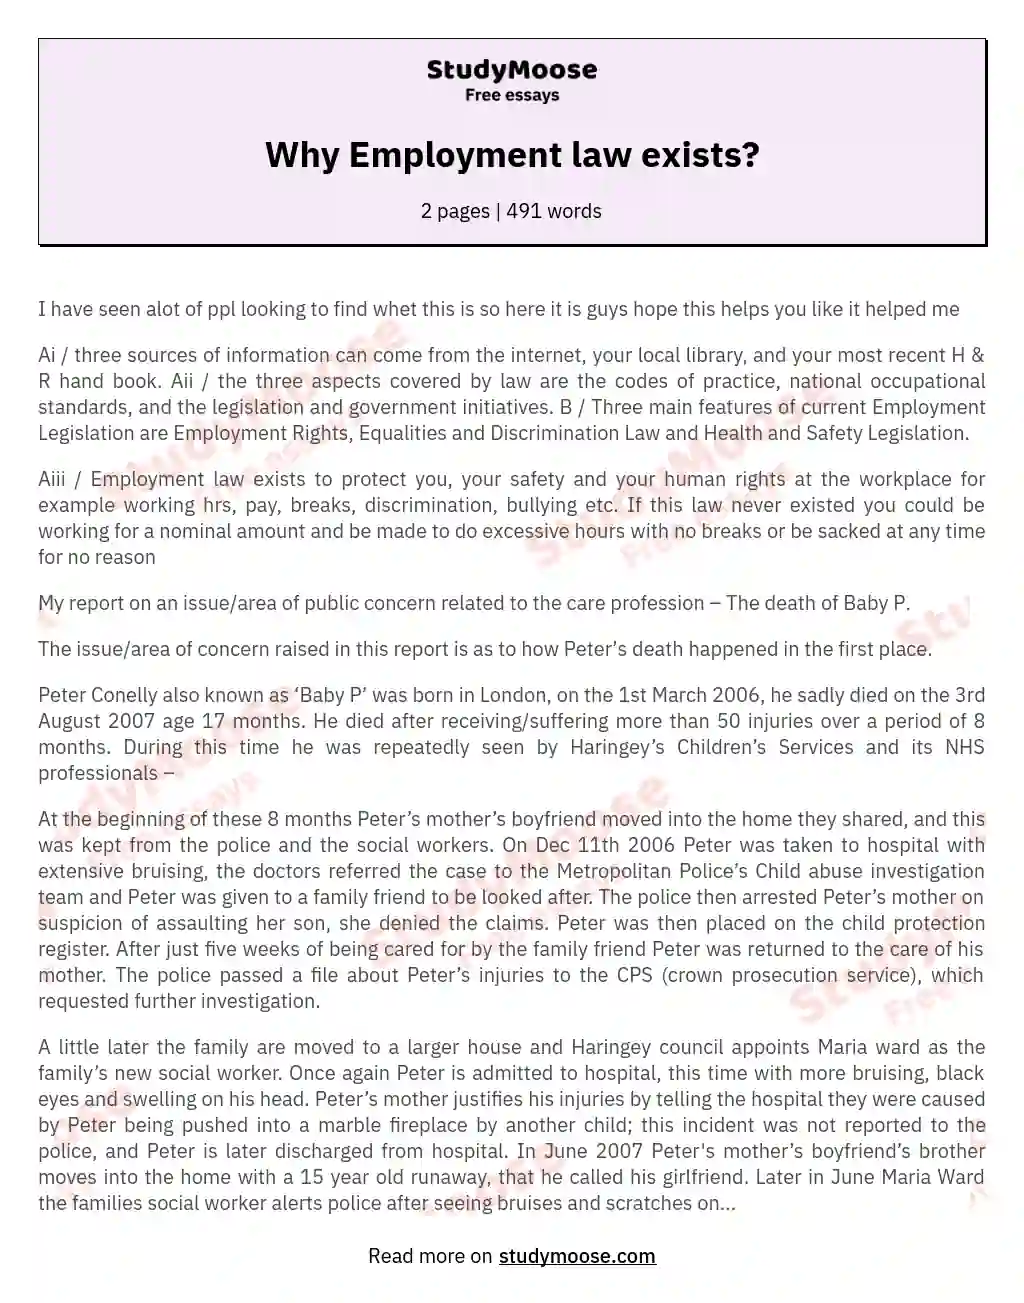 Why Employment law exists? essay